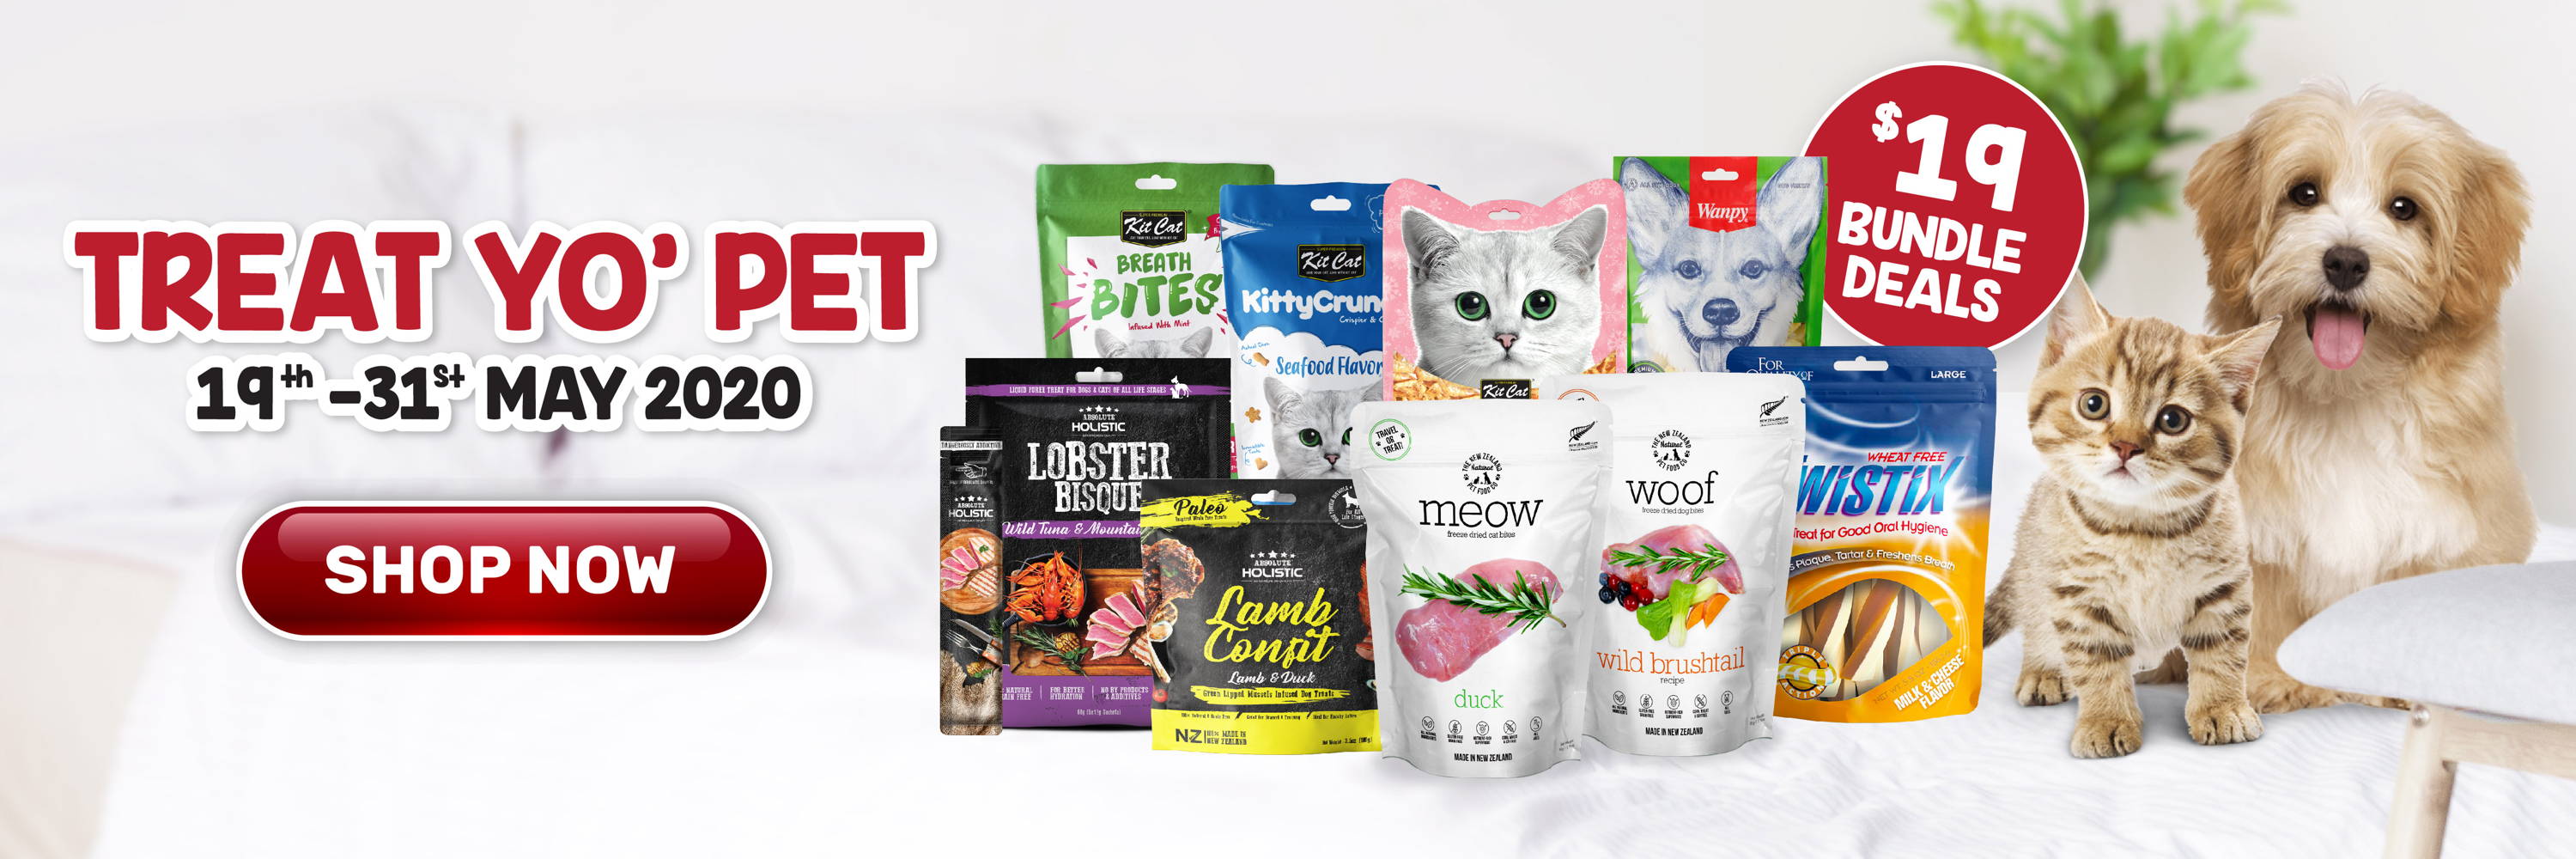 treat yo pet with b2k and wag & co $19 bundle dog and cat treats deal.